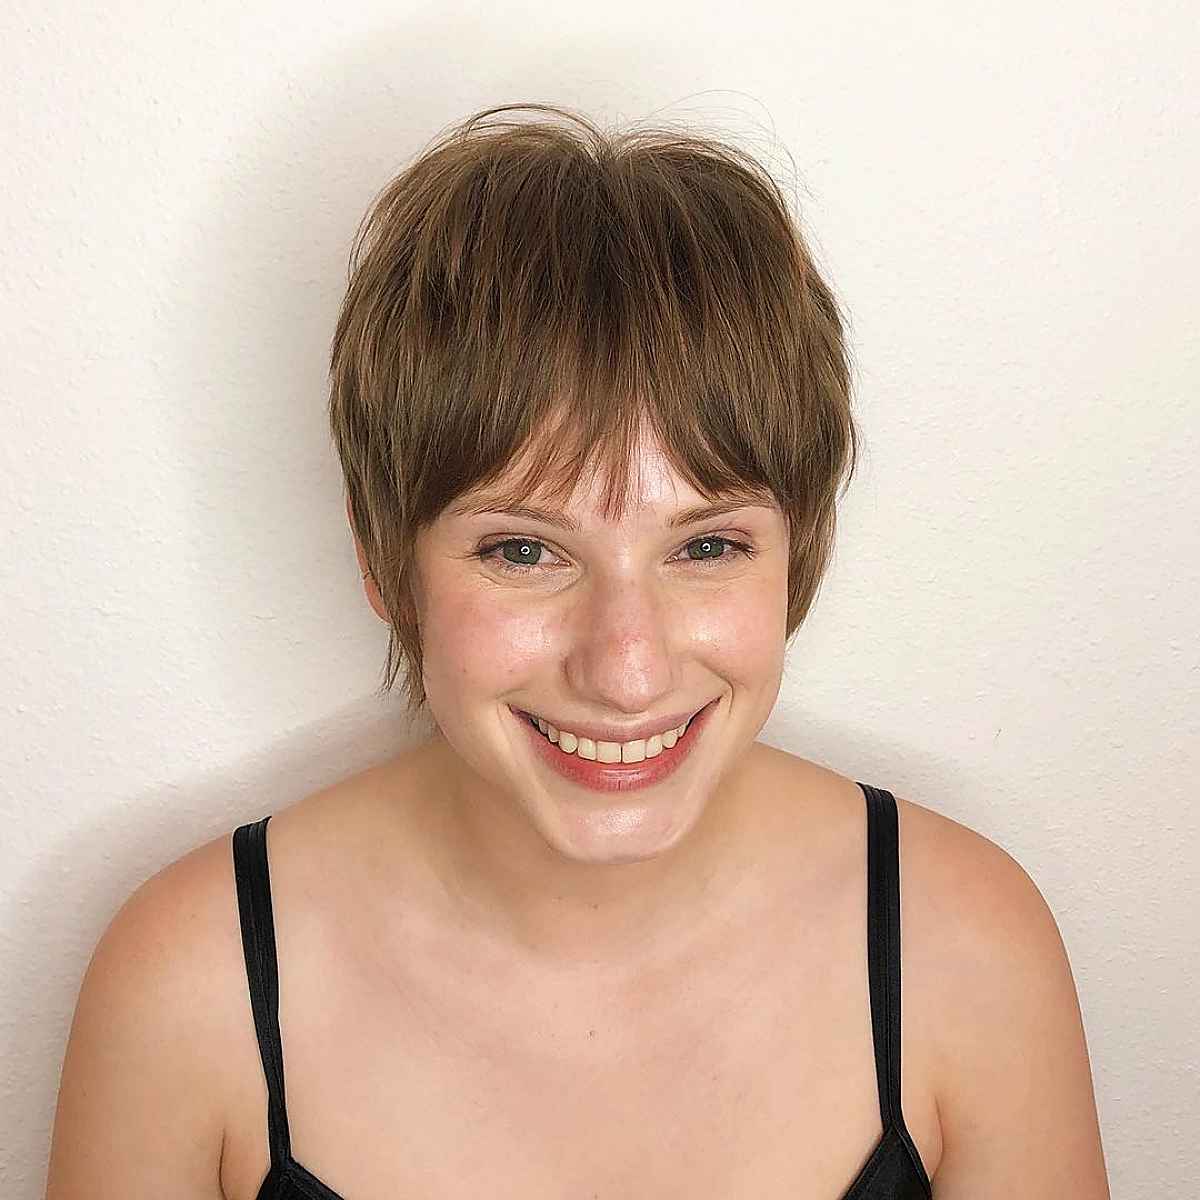 Short Layered Hair with Curtain Bangs for Women Over 40